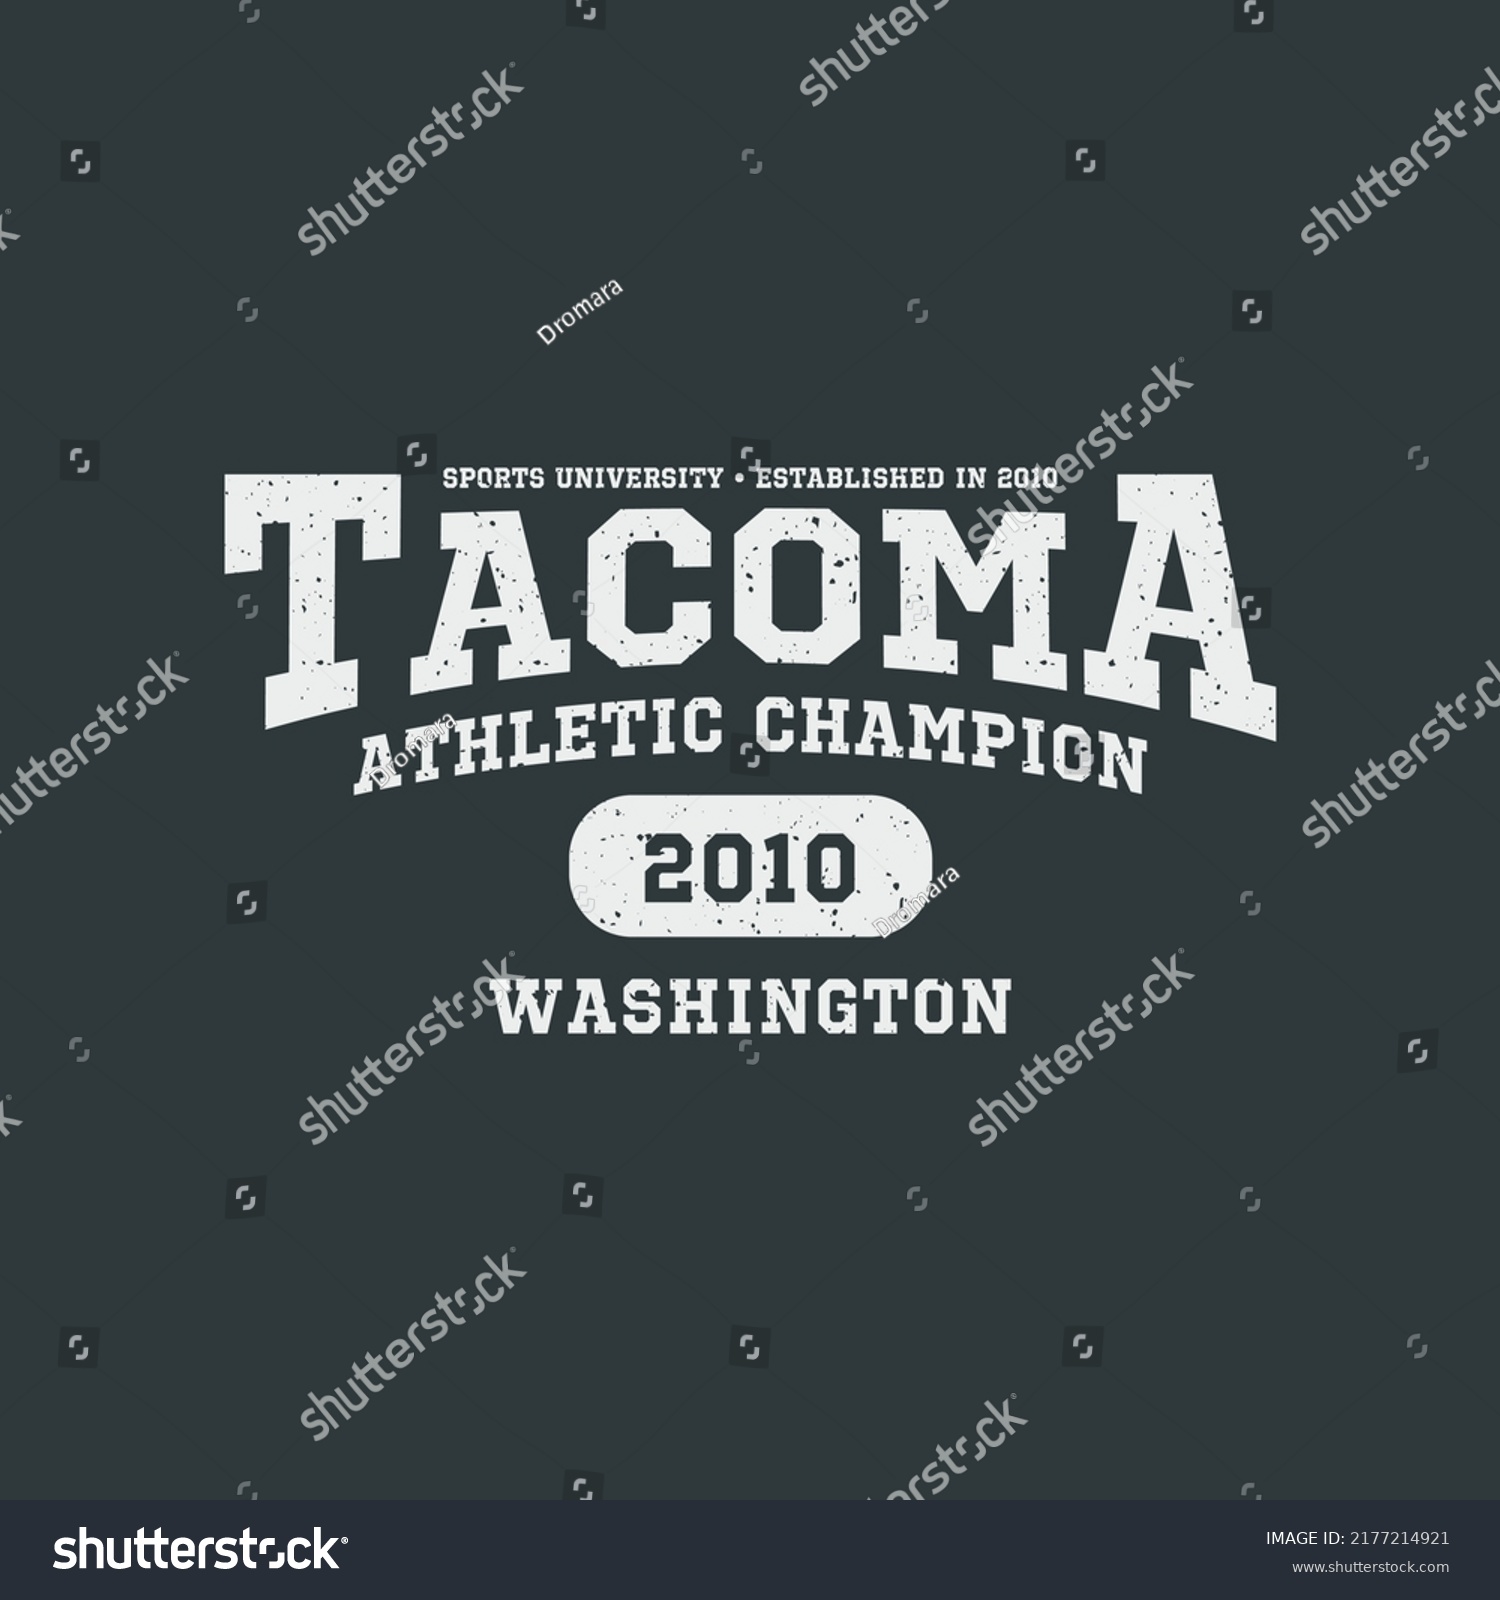 SVG of Tacoma, Washington design for t-shirt. College tee shirt print. Typography graphics for sportswear and apparel. Vector illustration. svg